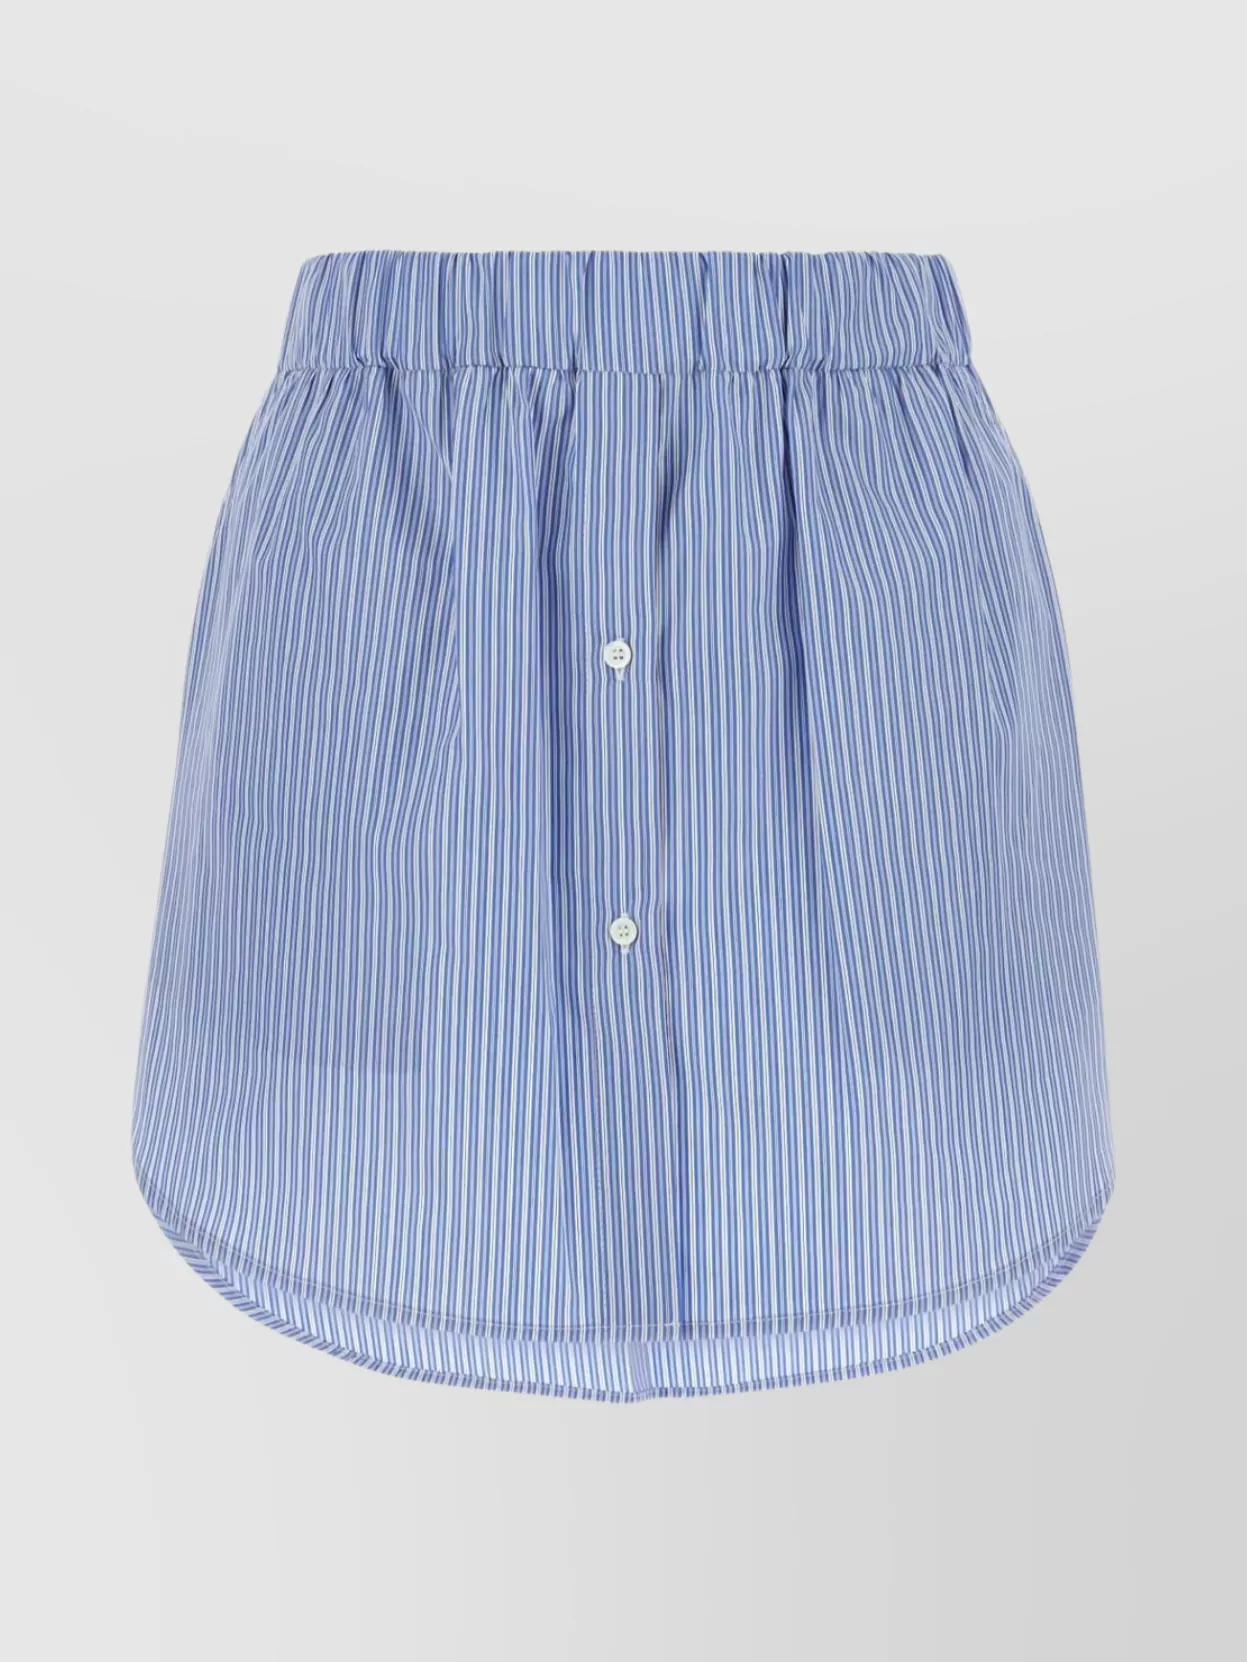 LOEWE STRIPED COTTON SKIRT WITH ELASTIC WAISTBAND AND BUTTON DETAIL